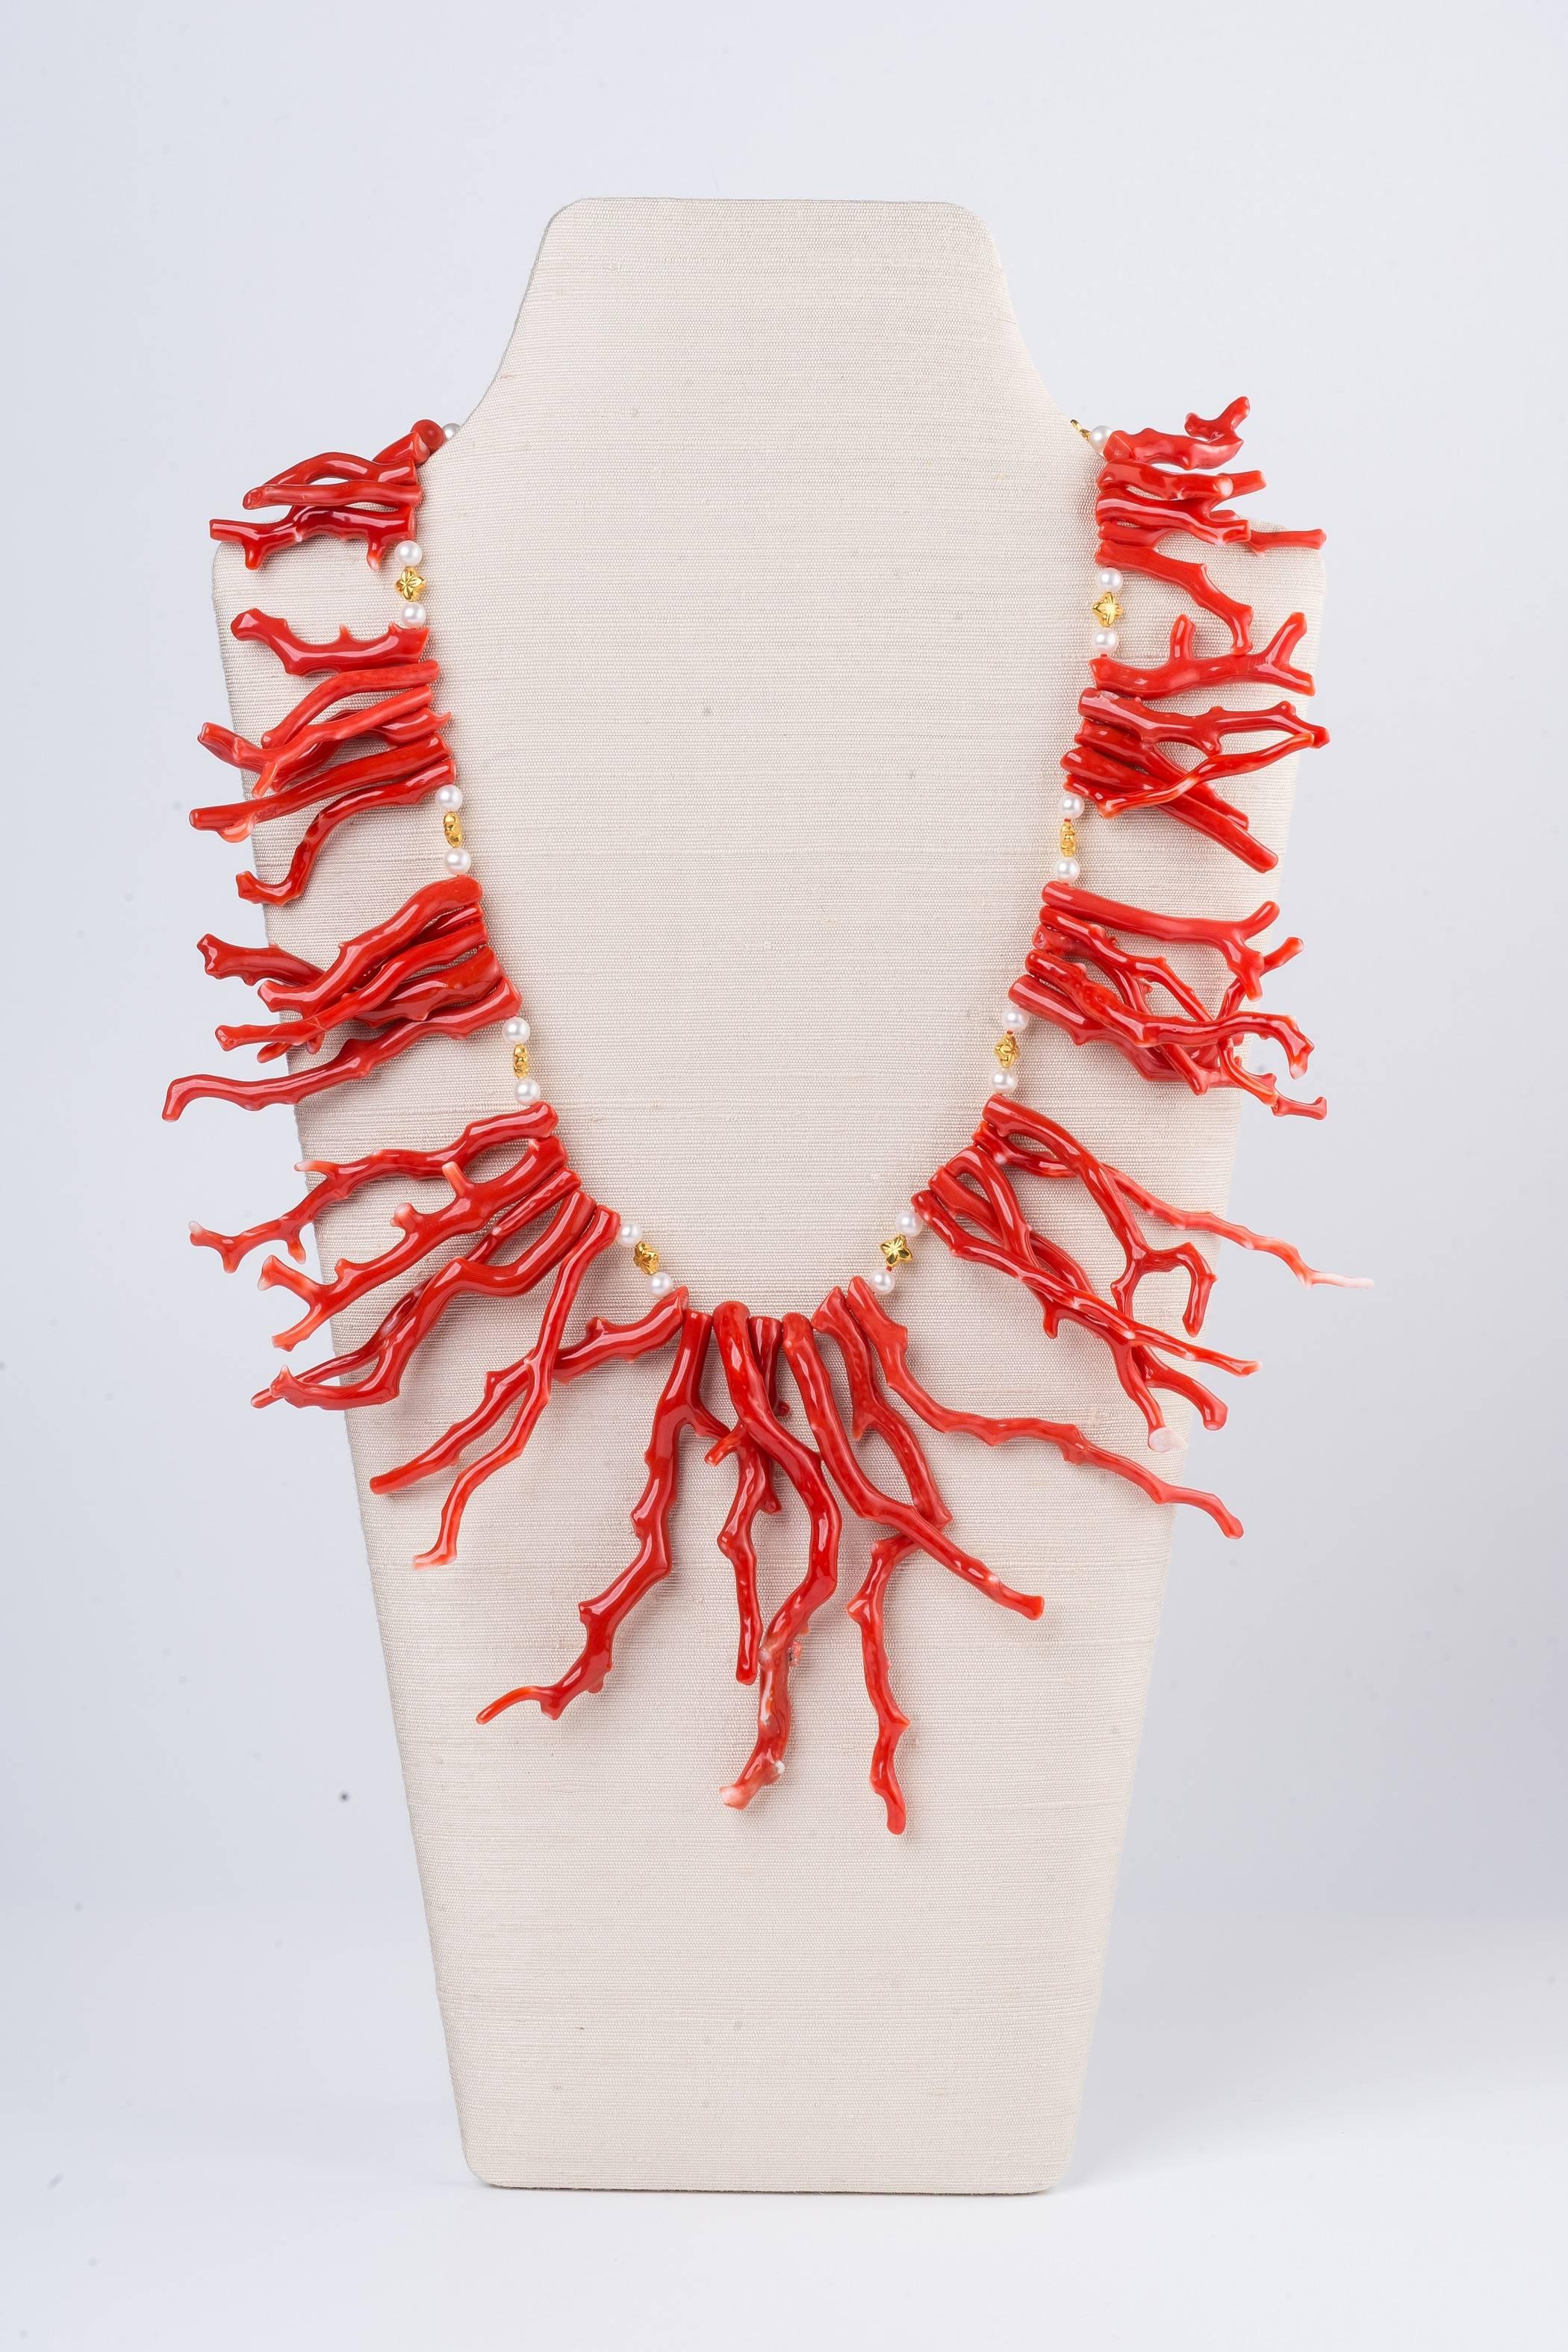 19 in L (48cm L) necklace with fine Sardinian branch coral, freshwater pearls and 18 karat gold beads
A striking coral branch necklace for summer days, the epitome of beach style. 